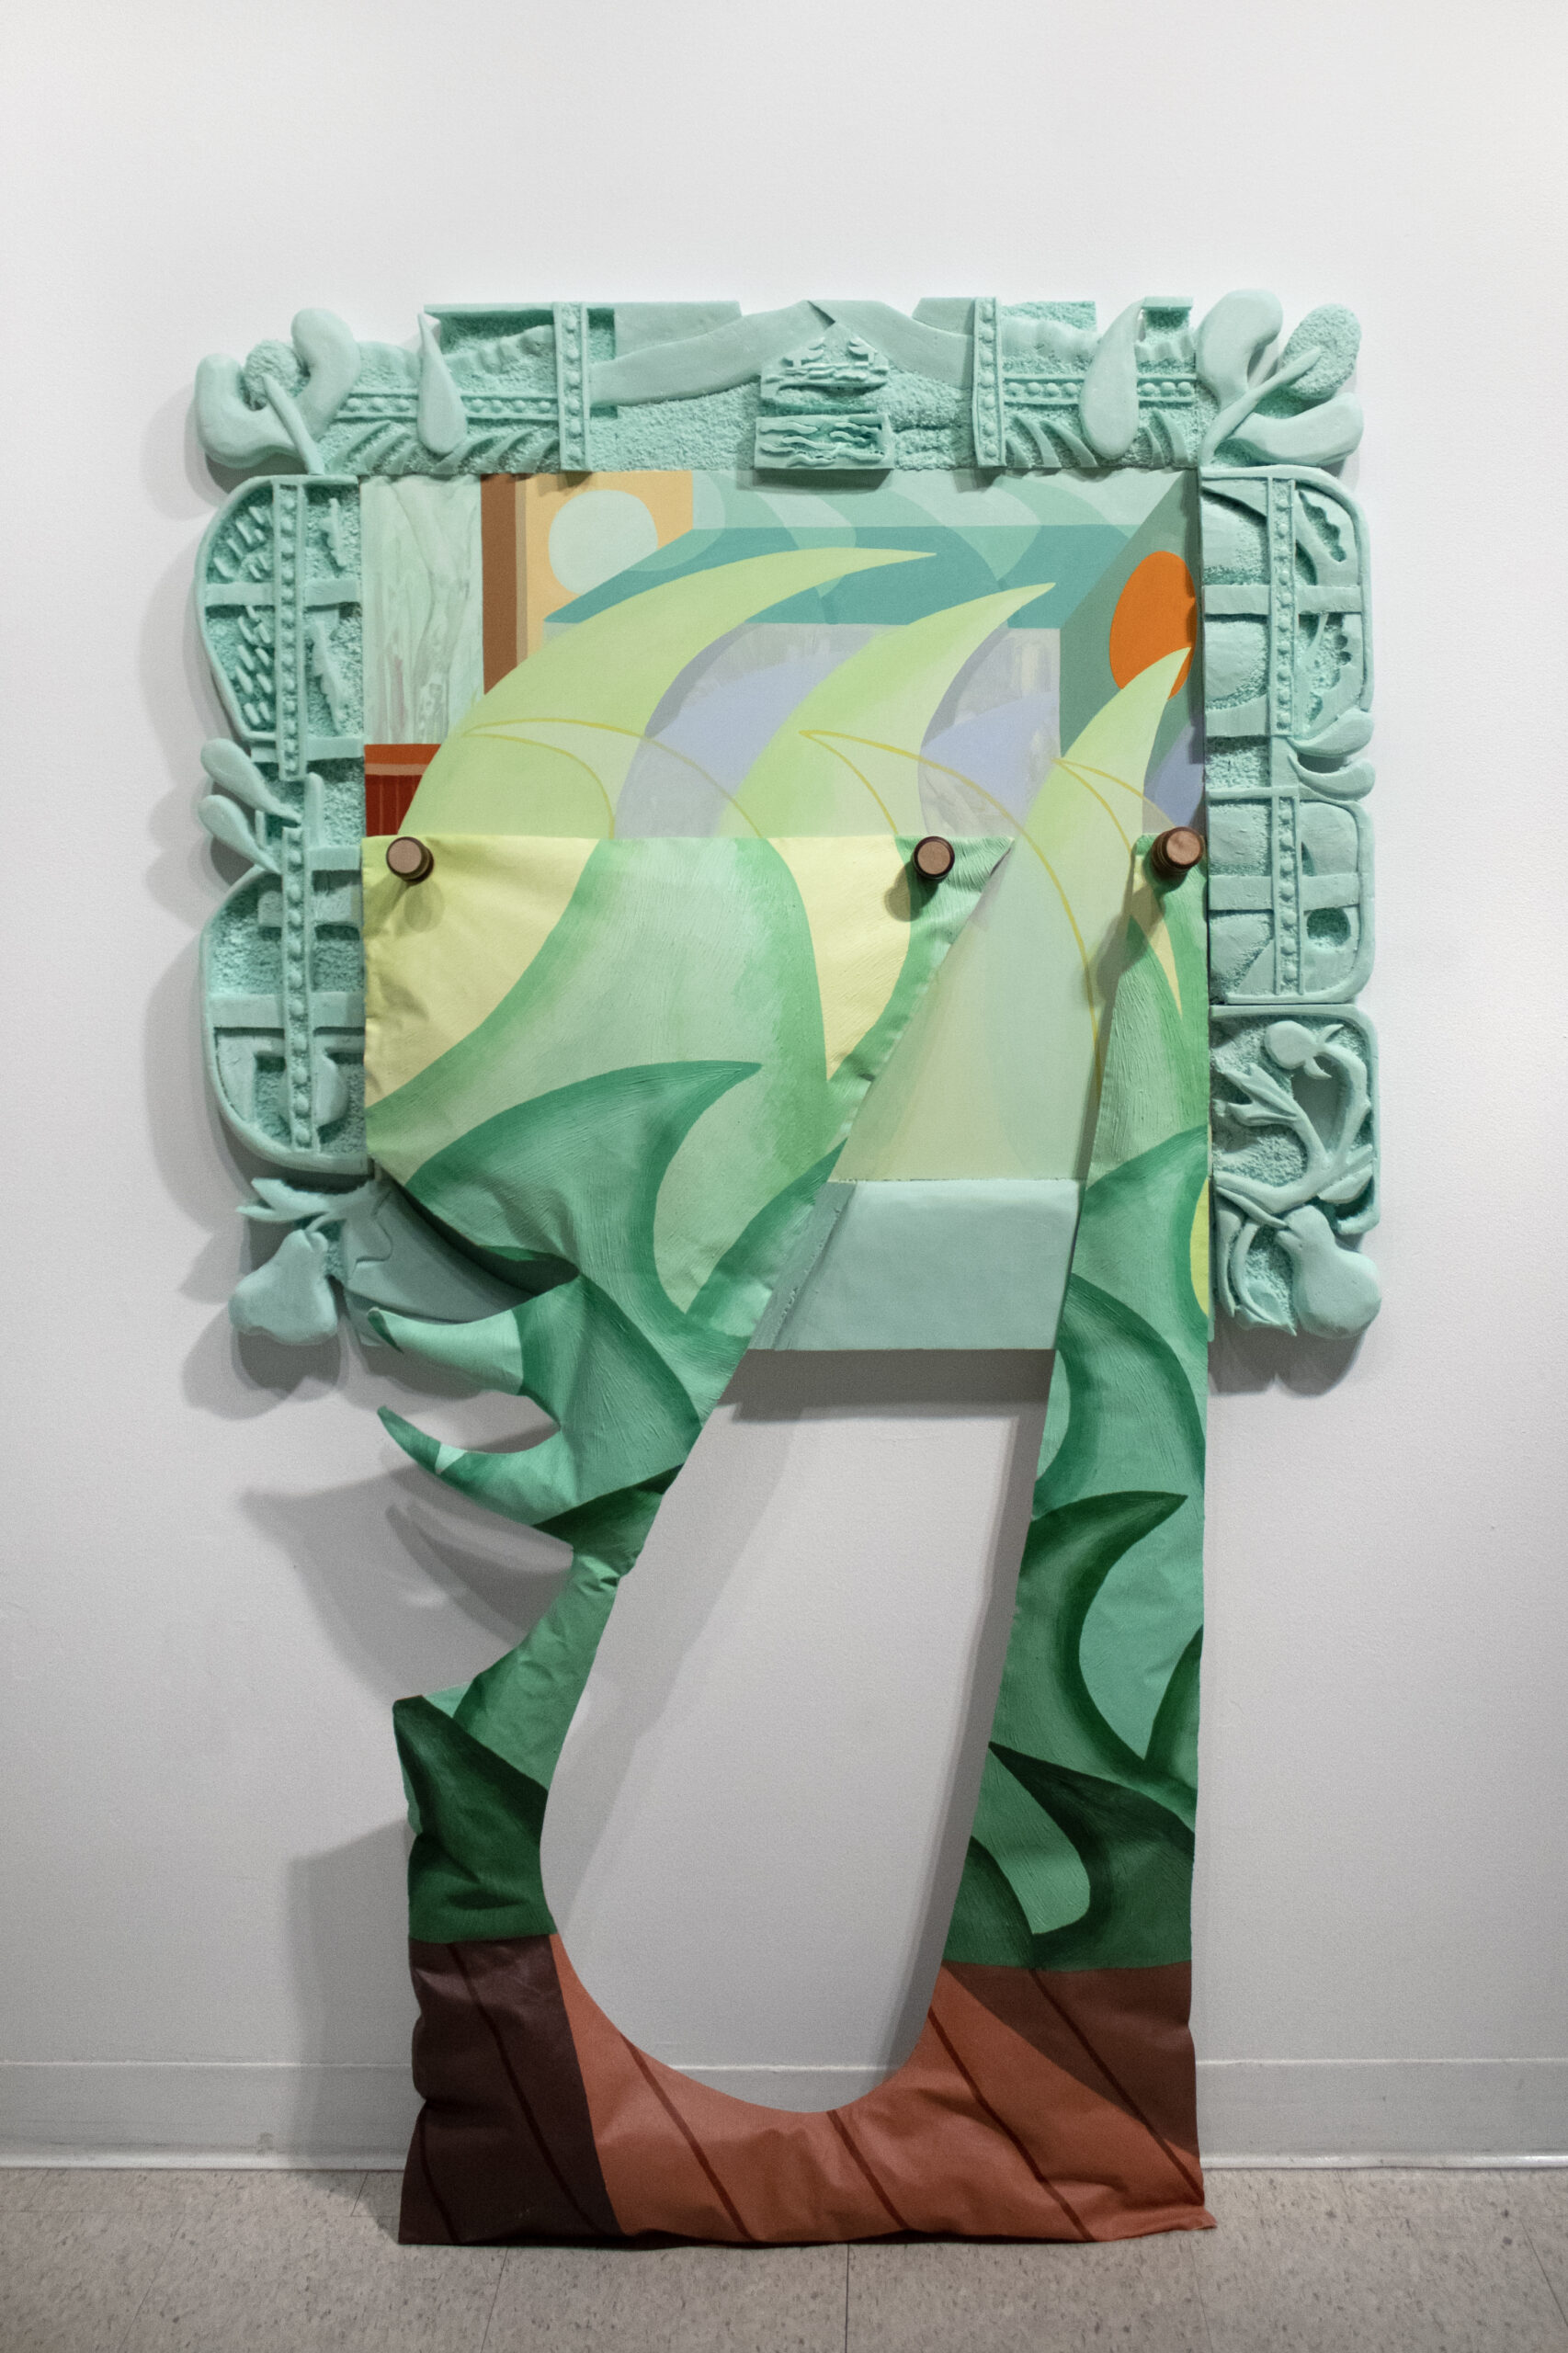 Hannah Parrett, Headstone for Interior Waves, 2022. Oil on panel, acrylic on canvas, foam, spindles, 73 x 42 x 3 in.